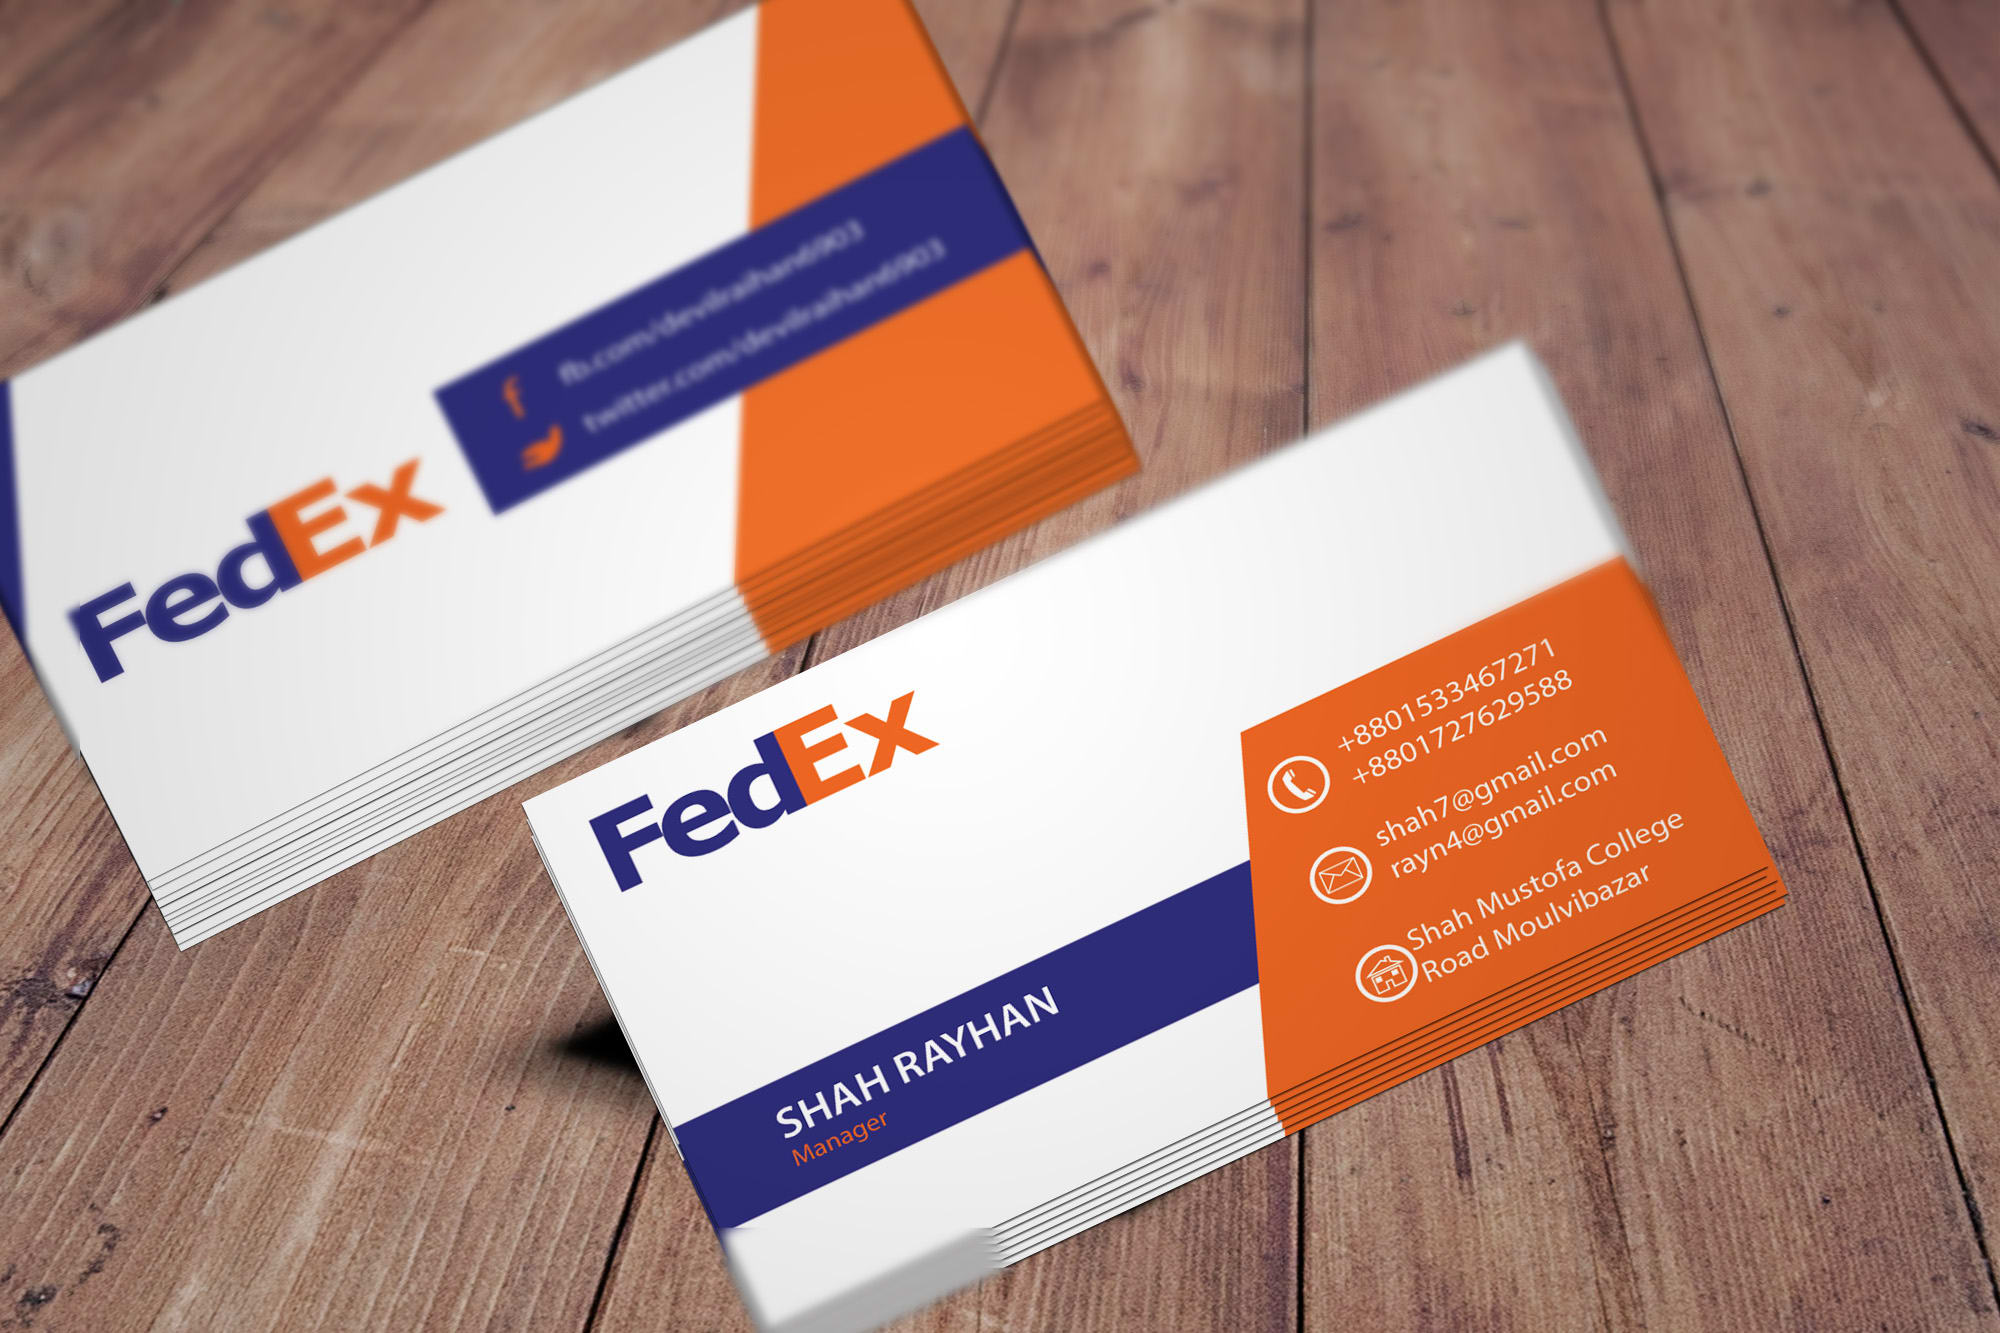 fedex business cards printing 1